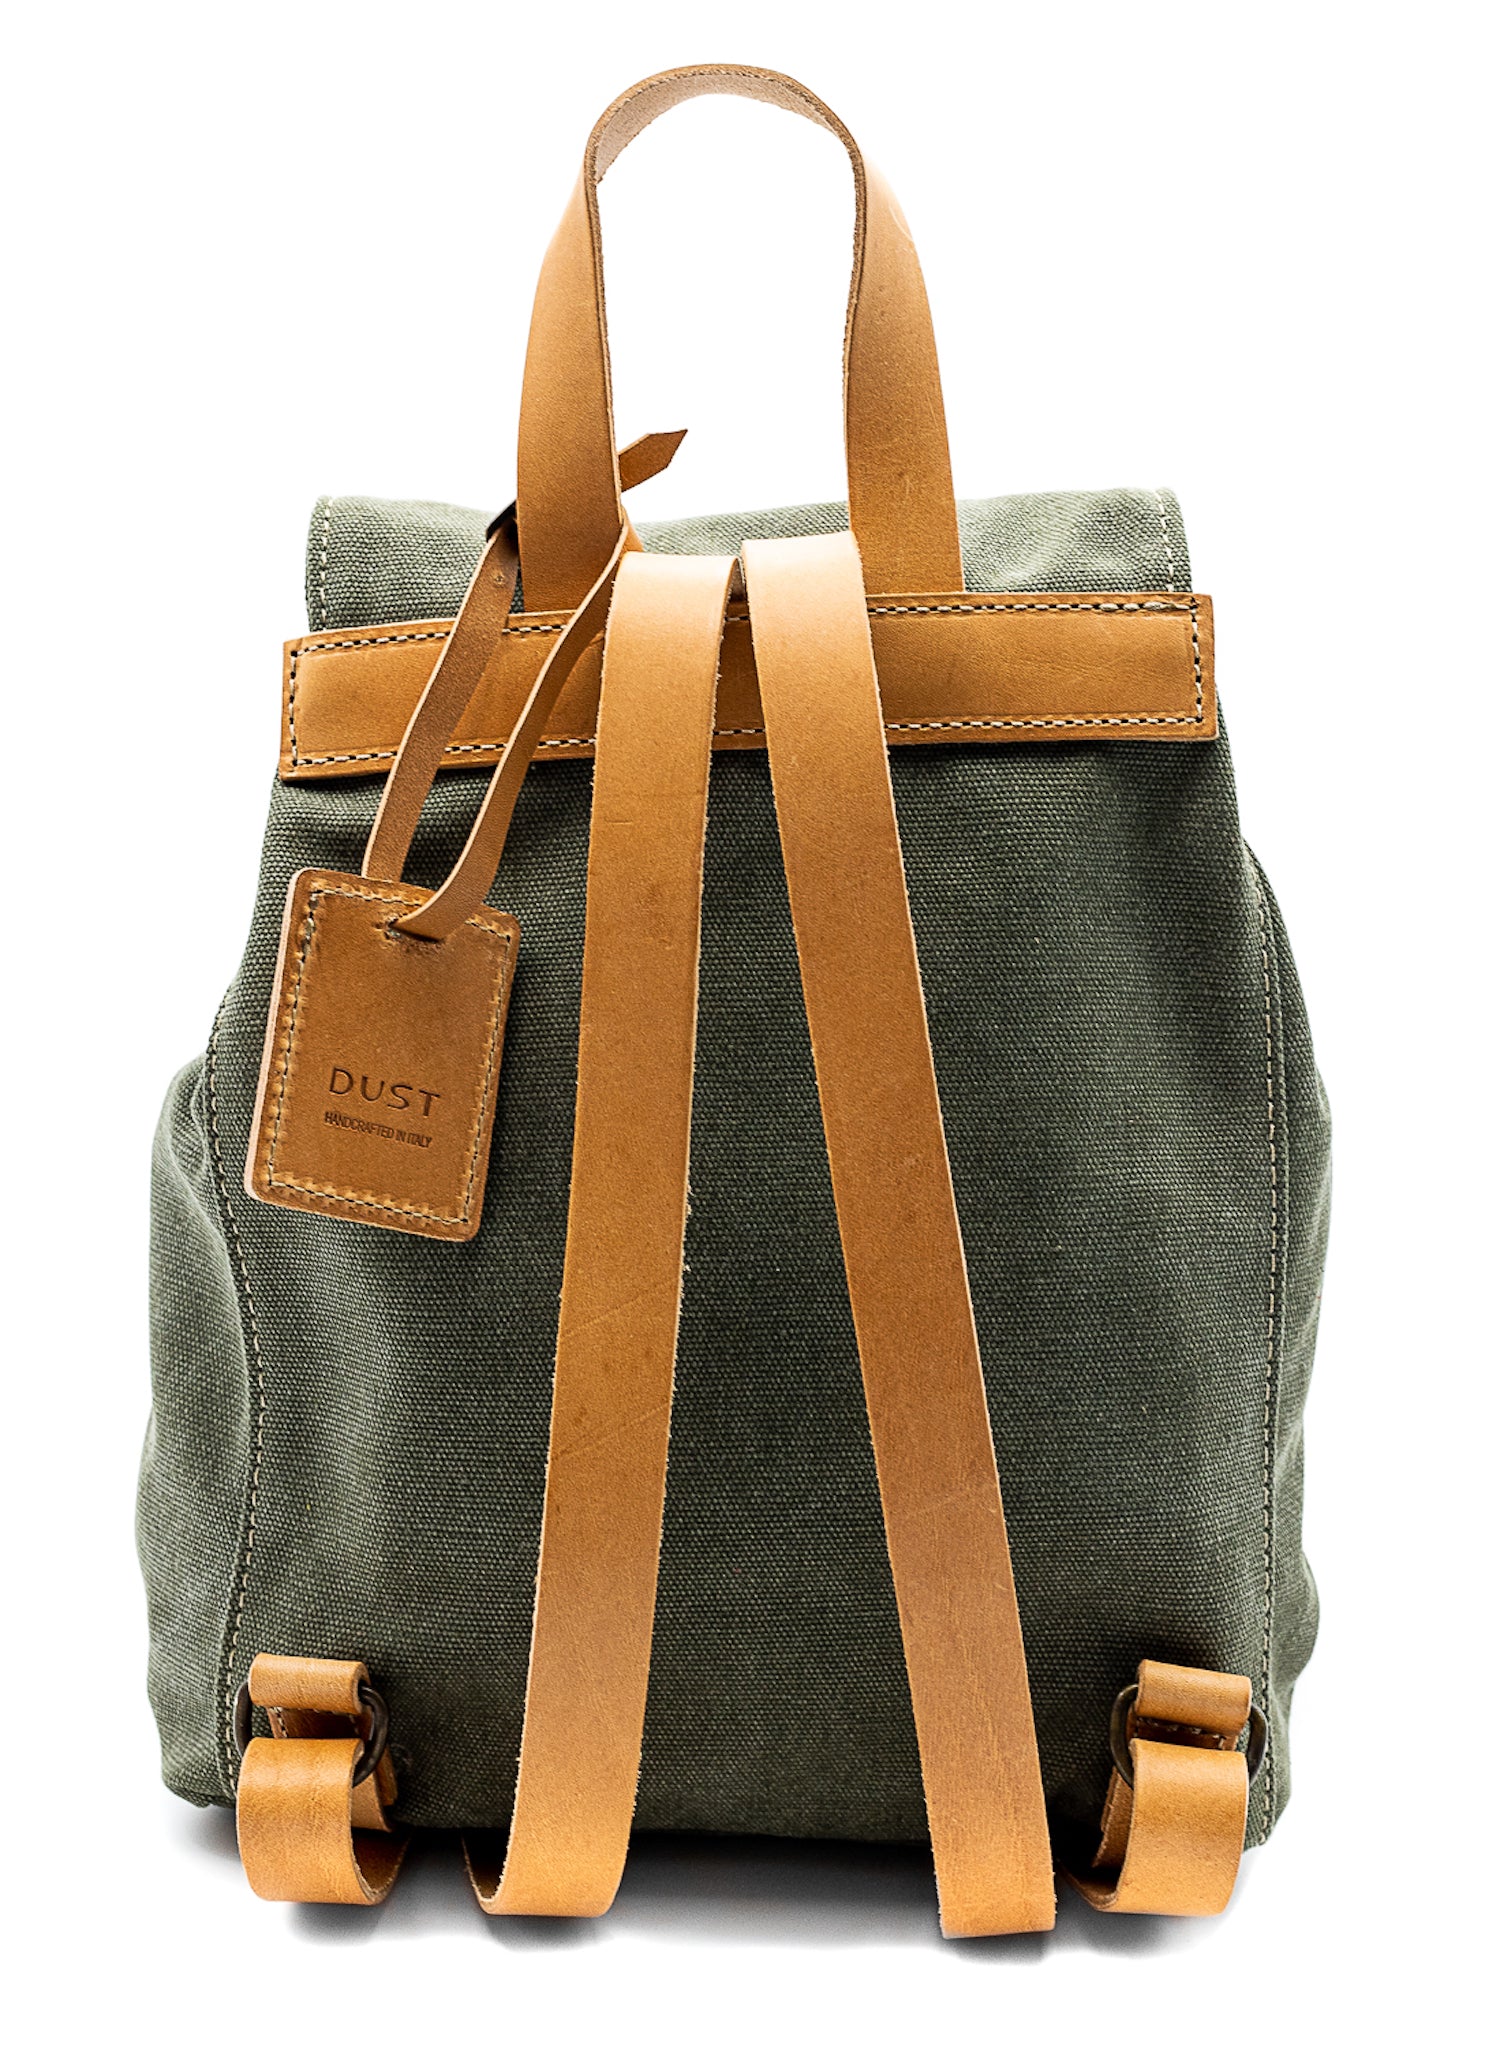 Fabric Amazing Backpack The Dust Company su Artisia Store